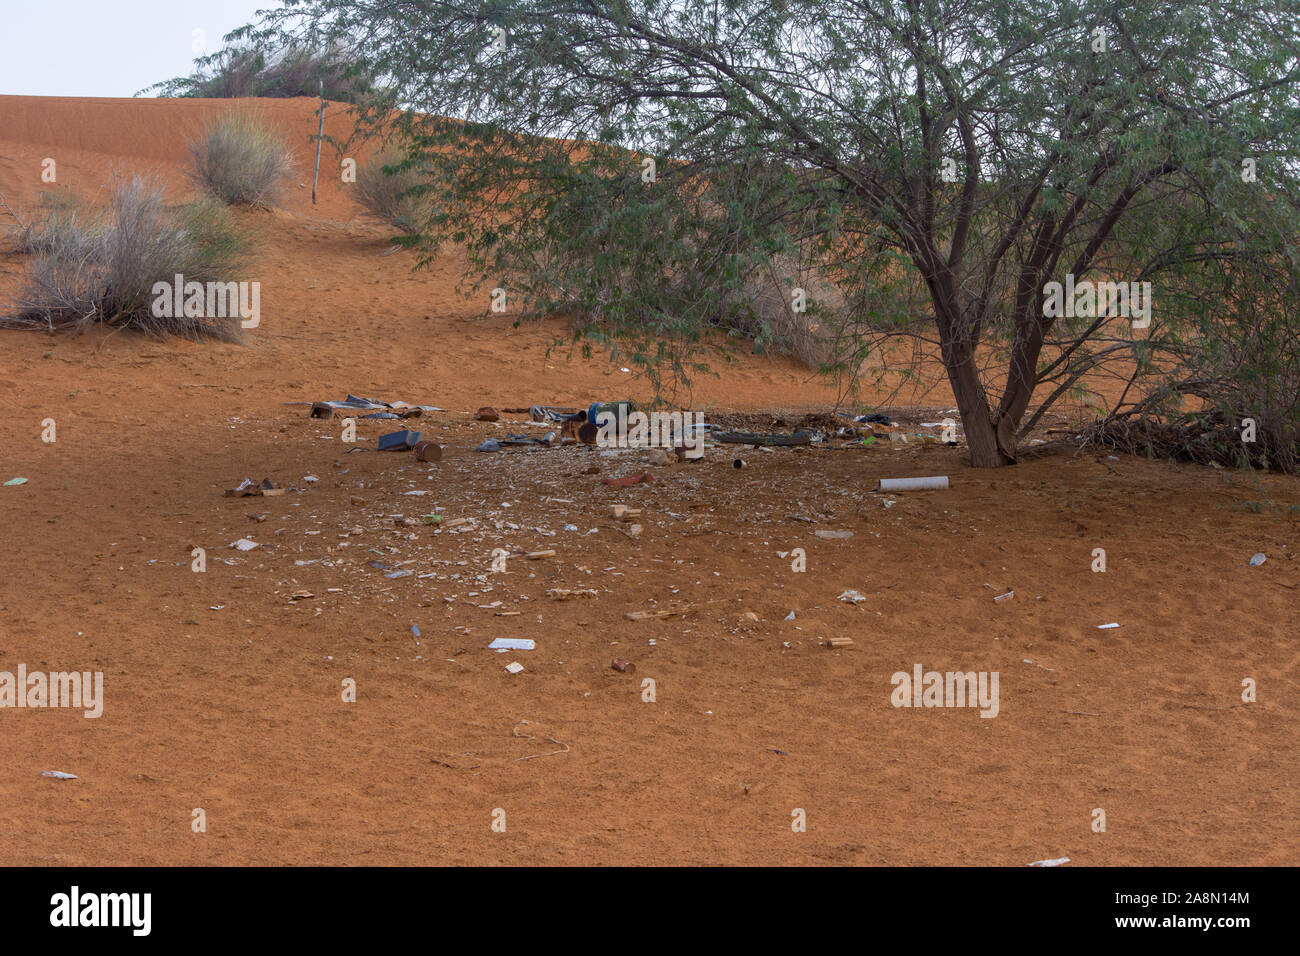 Plastic pollution and garbage dumping in the desert sand under a tree. Need for awareness of enviornmental protection, recycling, and protecting the w Stock Photo